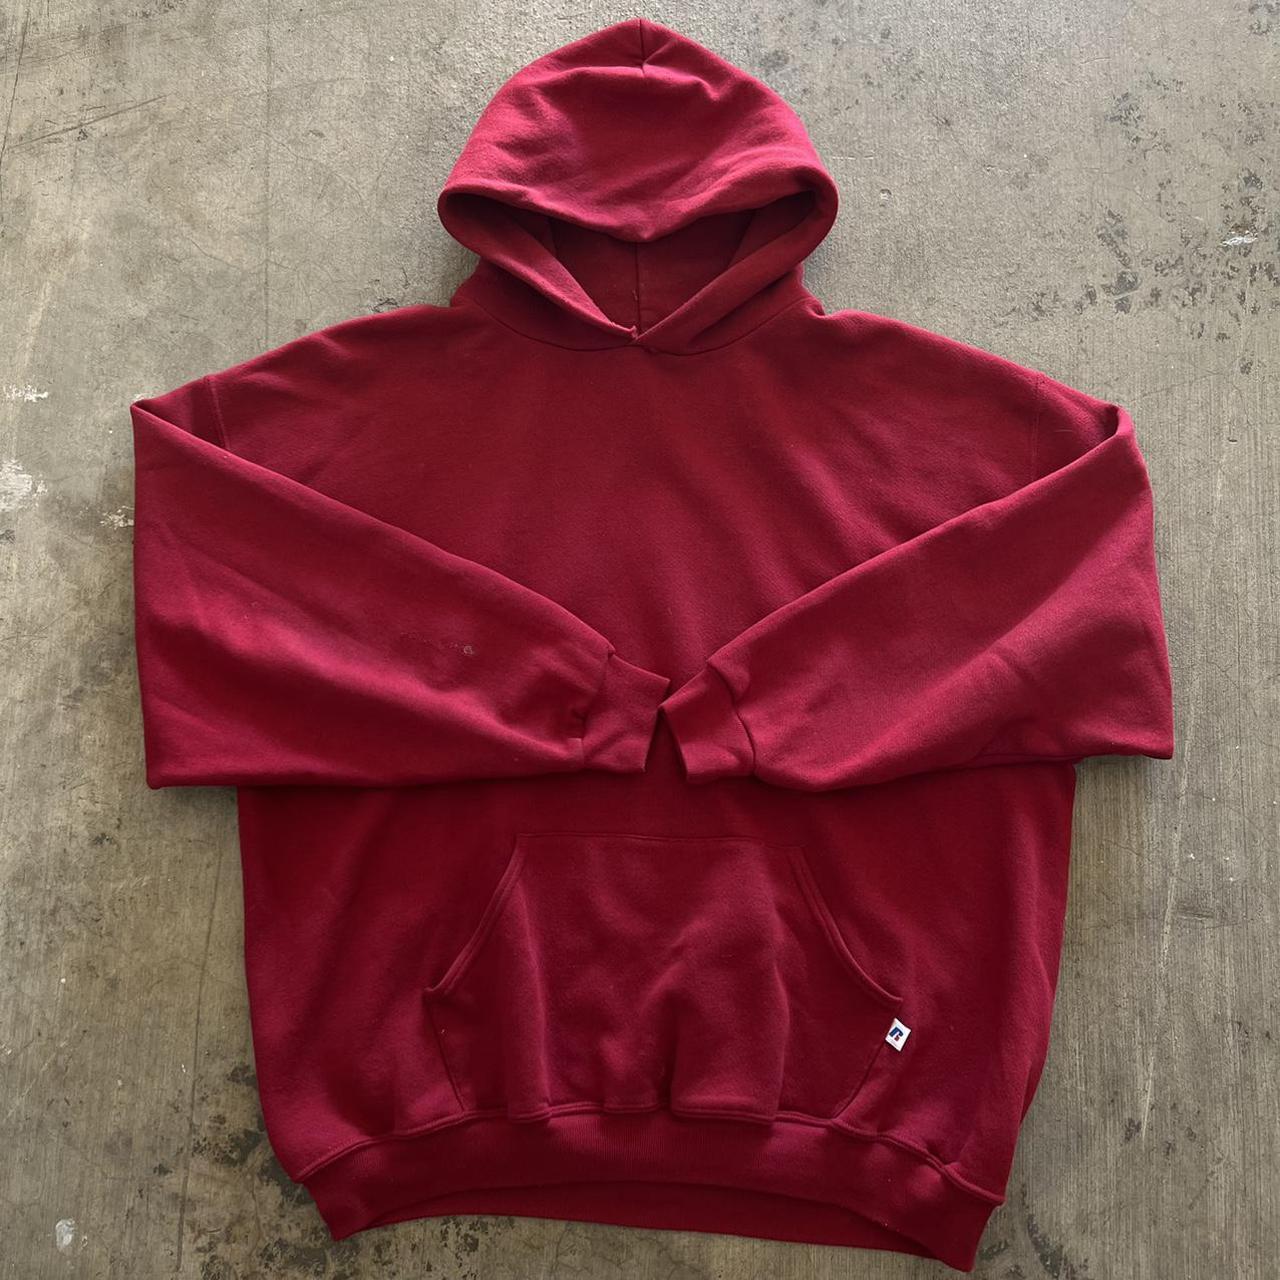 90’s RUSSELL HOODIE!! this color is so insane in... - Depop